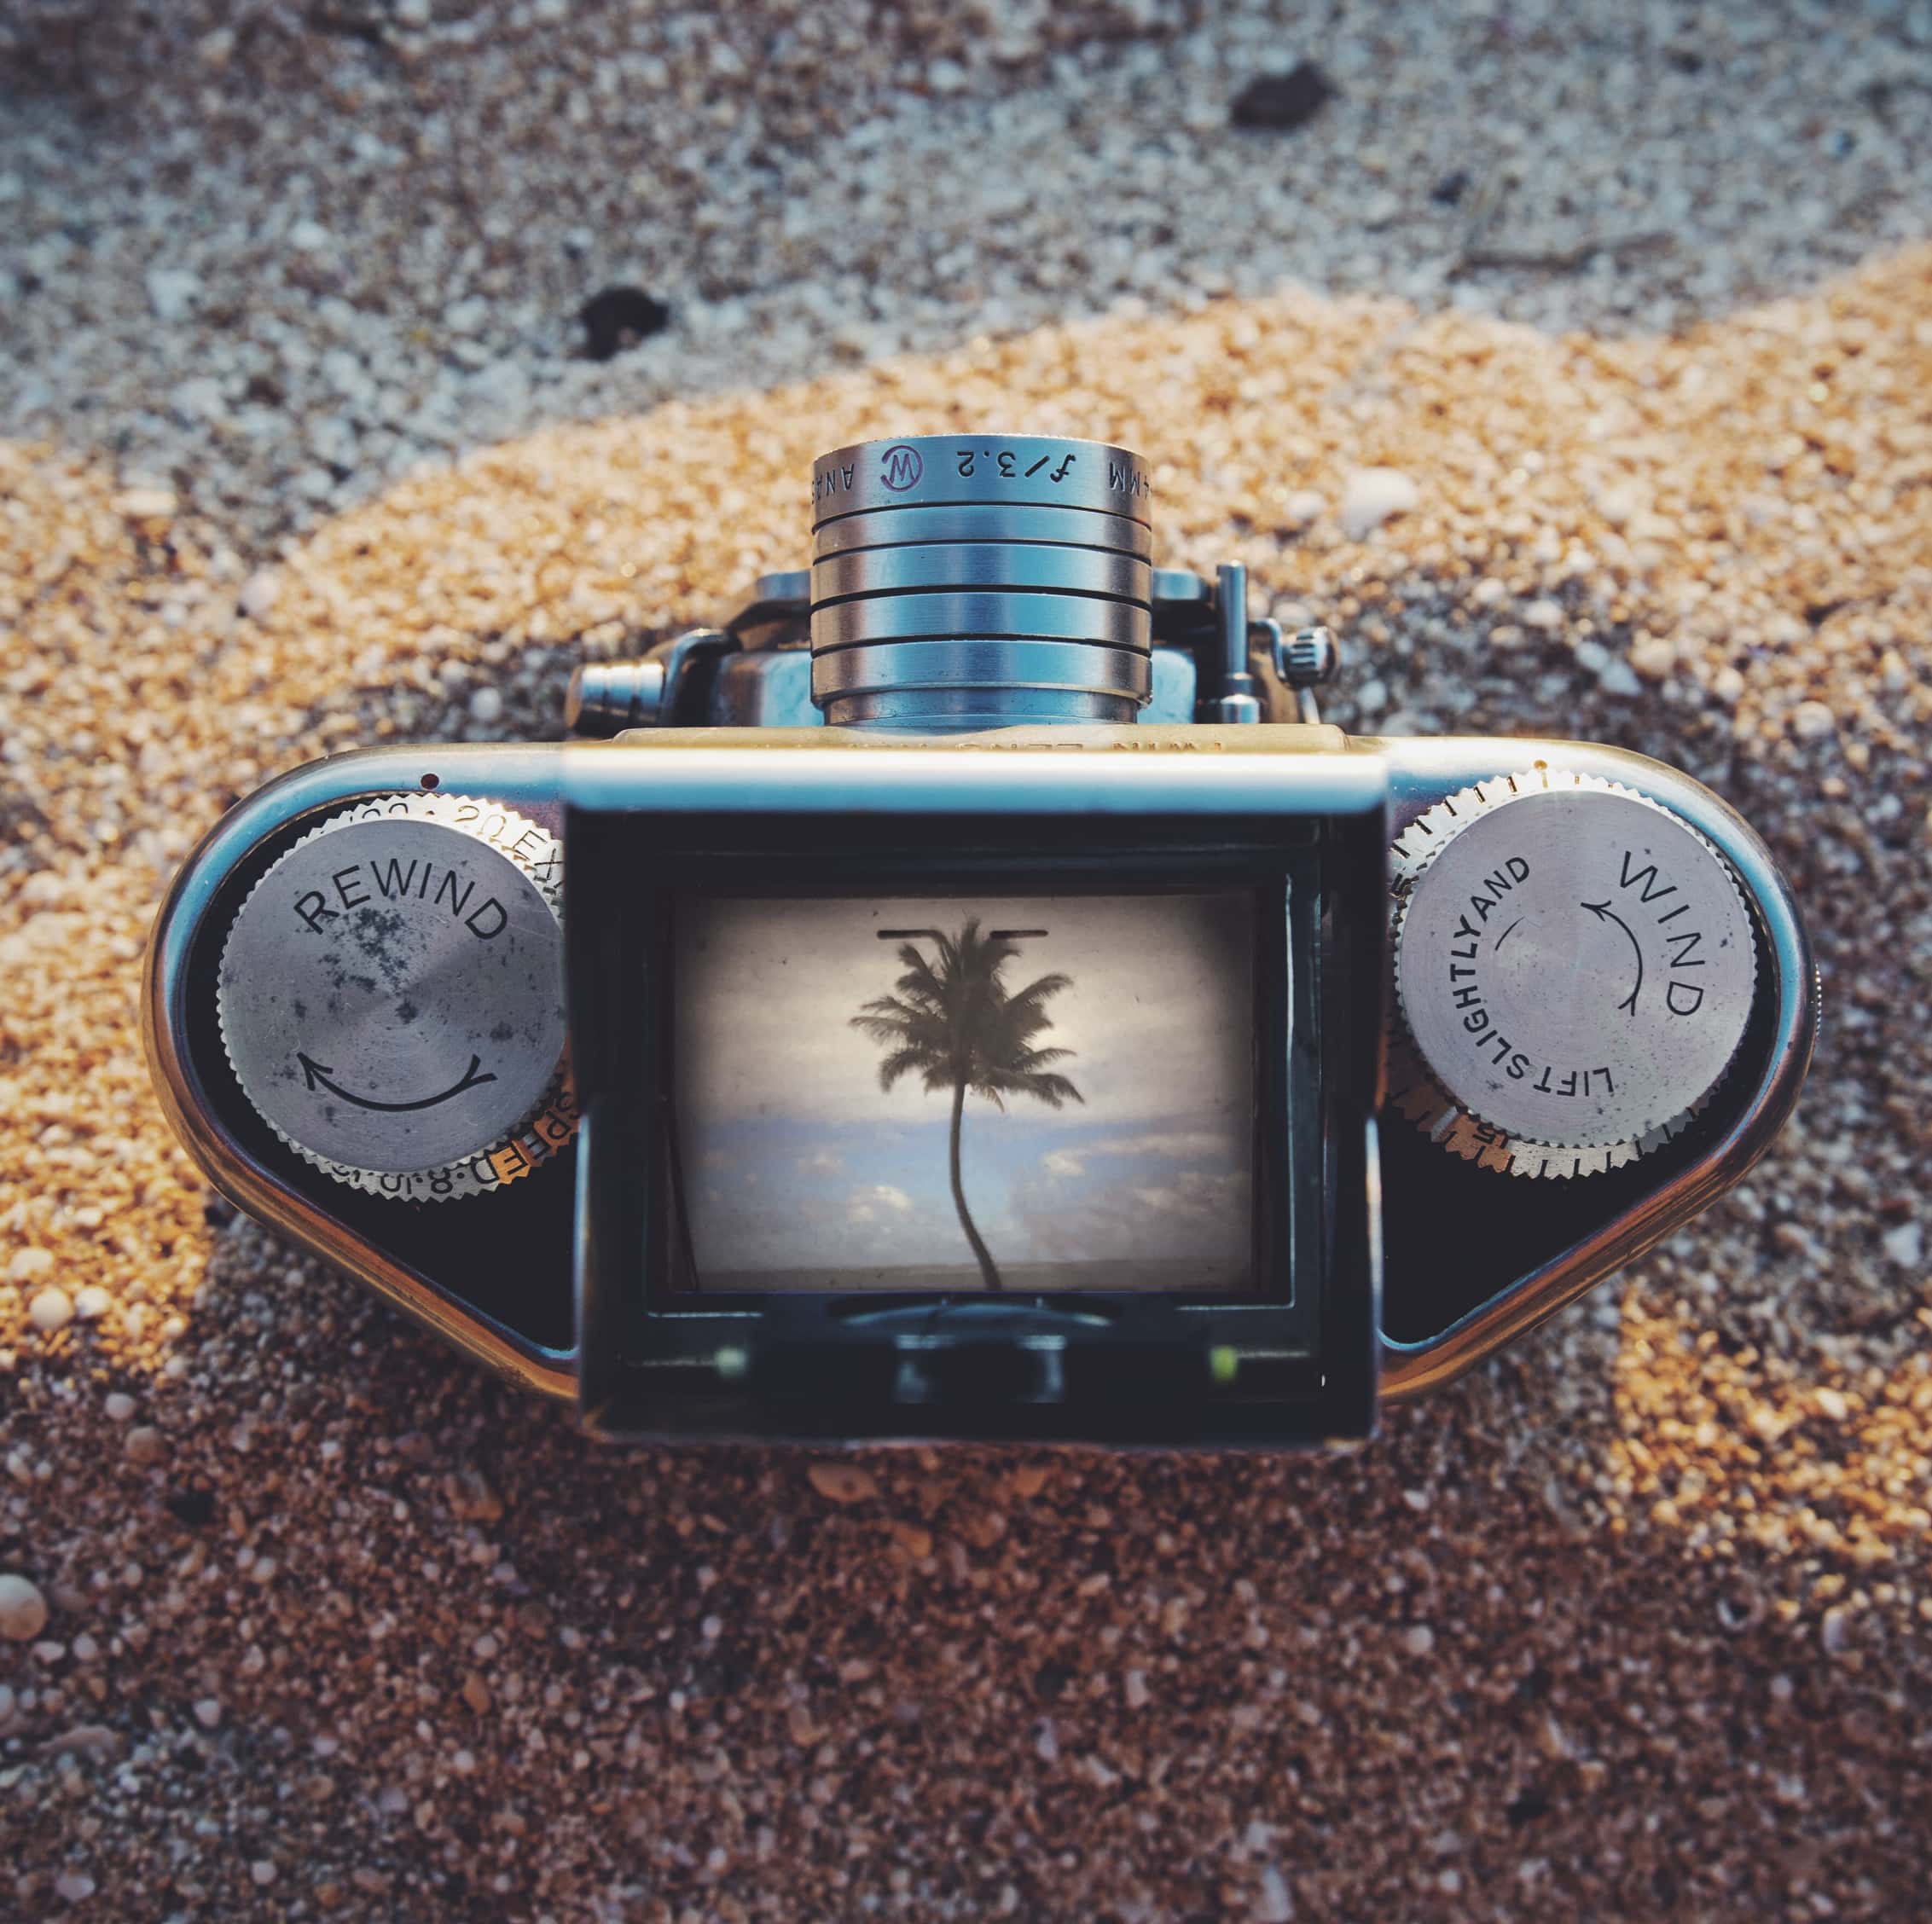 A palm tree and the ocean displayed in a waist-level viewfinder on a beach in Hawaii.